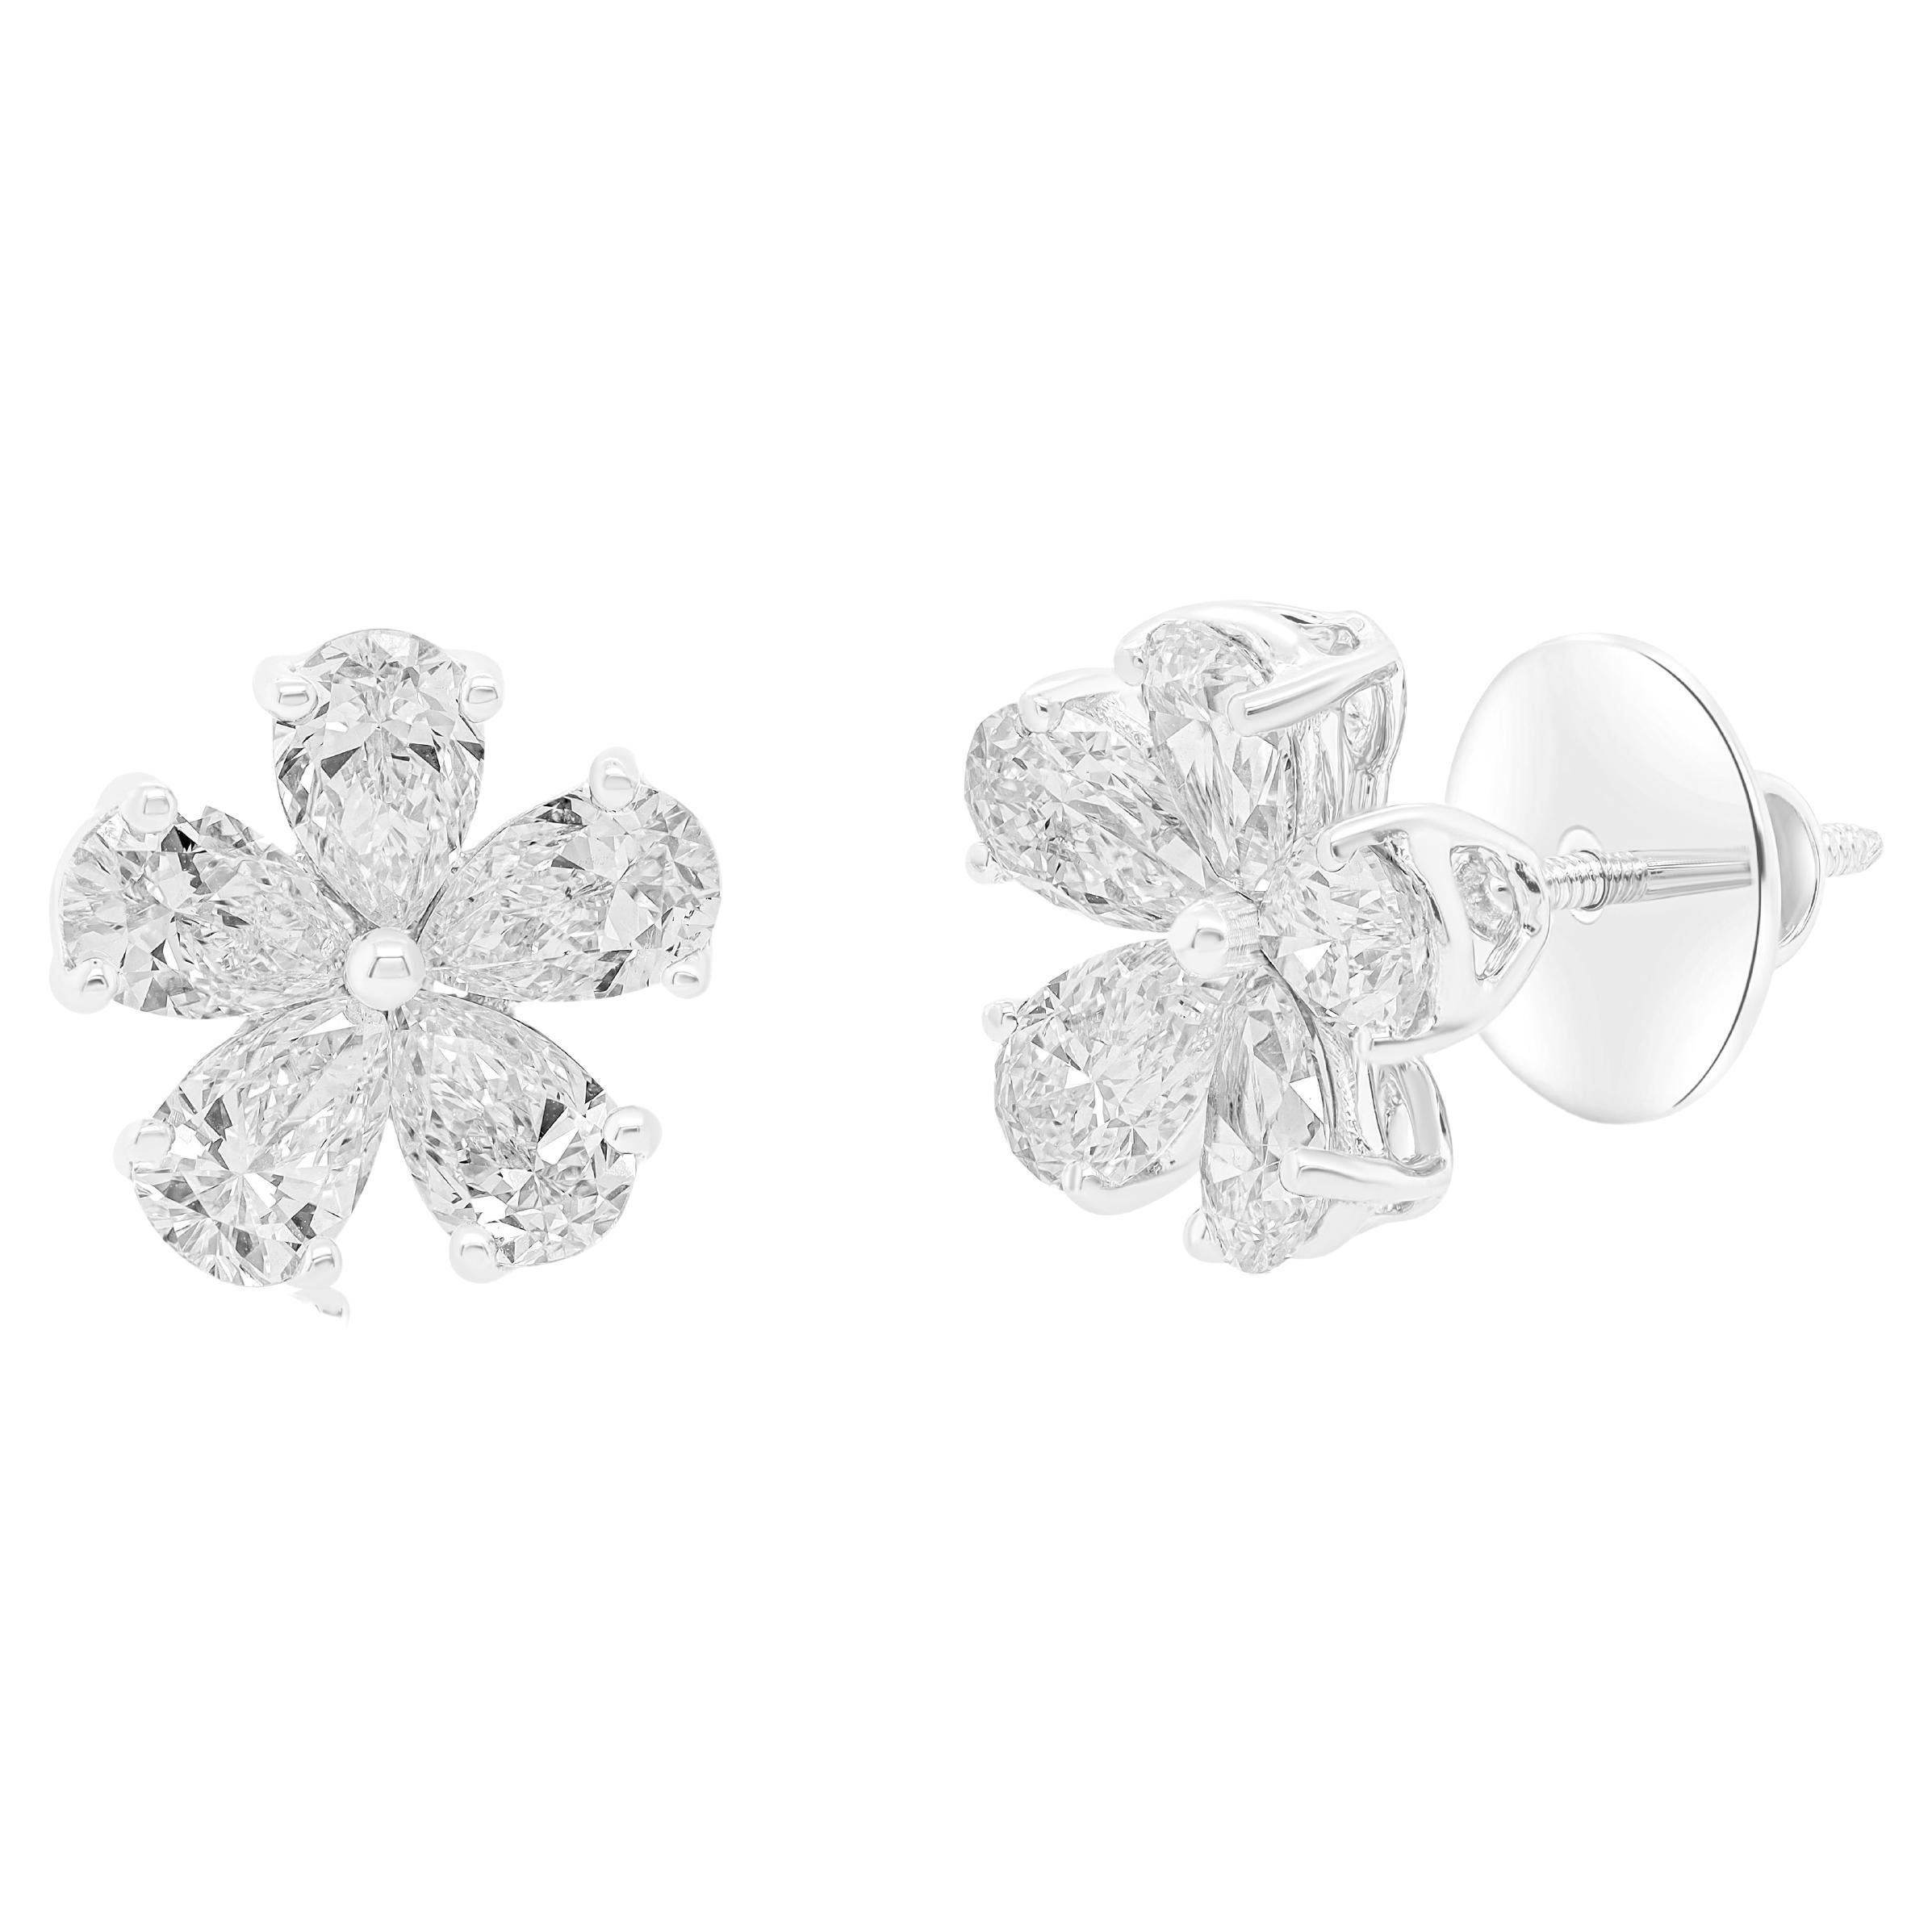 Diana M. 18KT WHITE GOLD EARRING STUDS FLOWER PEAR SHAPE 4.01cts  DIAMONDS For Sale